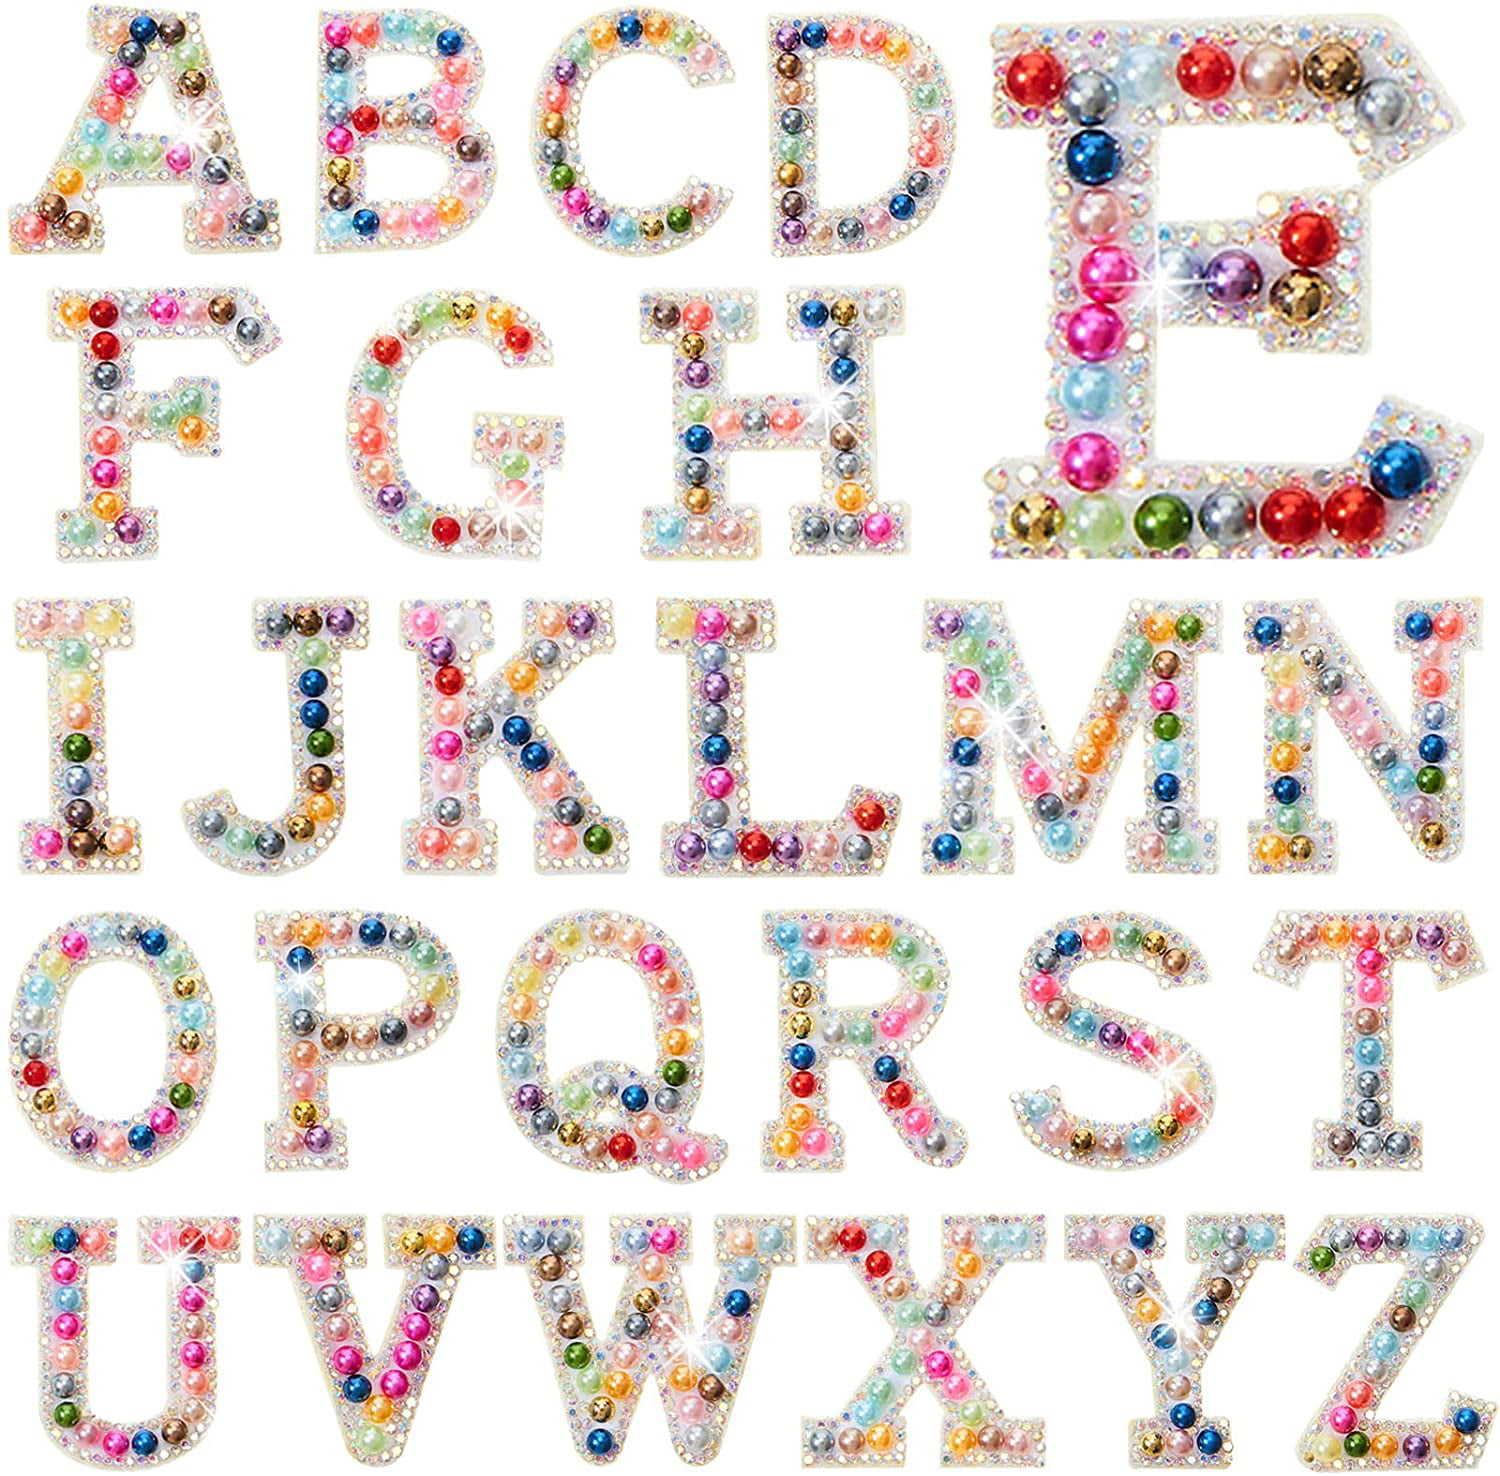 Colorful Iron on Letter A-Z Pearl Rhinestone English Letter Patches Pearls Rhinestone Iron on Letter Patches Glitter Pearl Sew on Alphabet Patches Imitation Pearl Letter Appliques for Clothes 